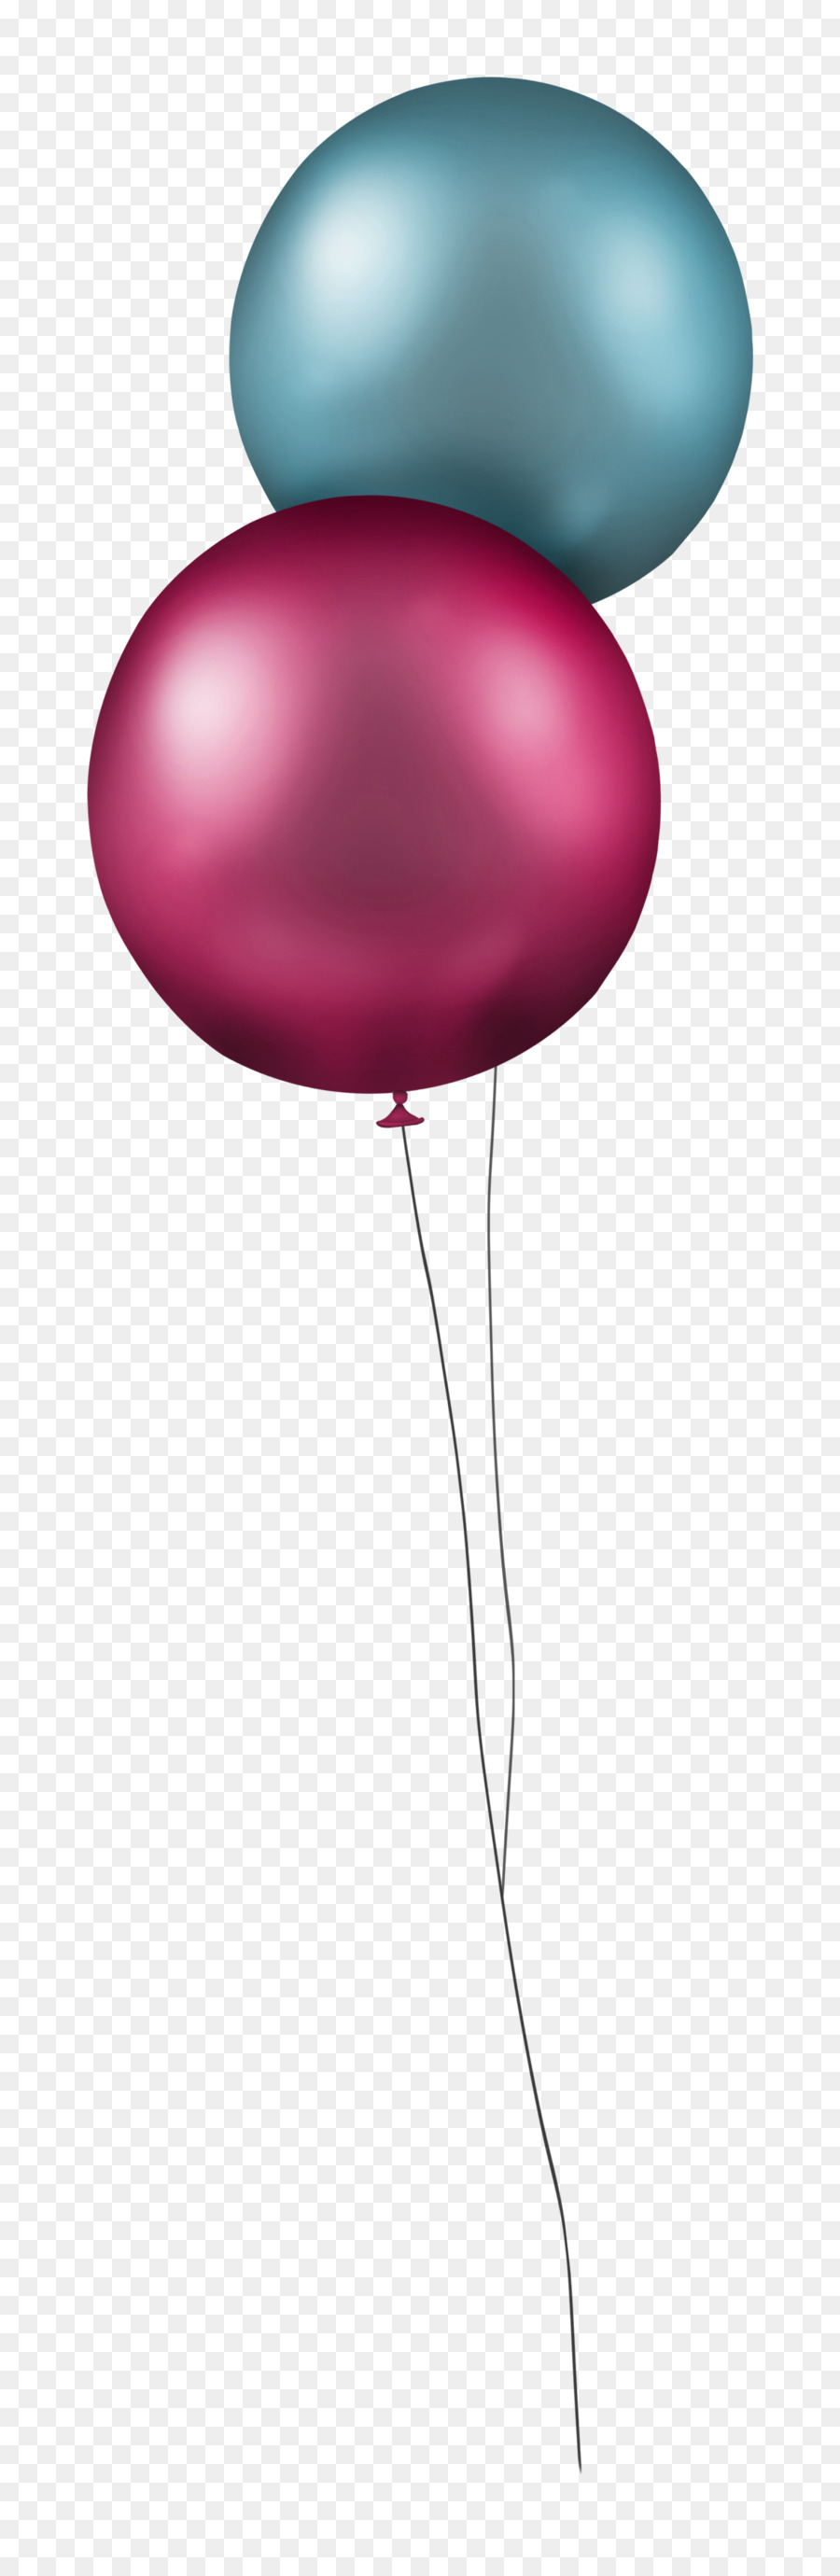 Two Balloons PNG - 150628